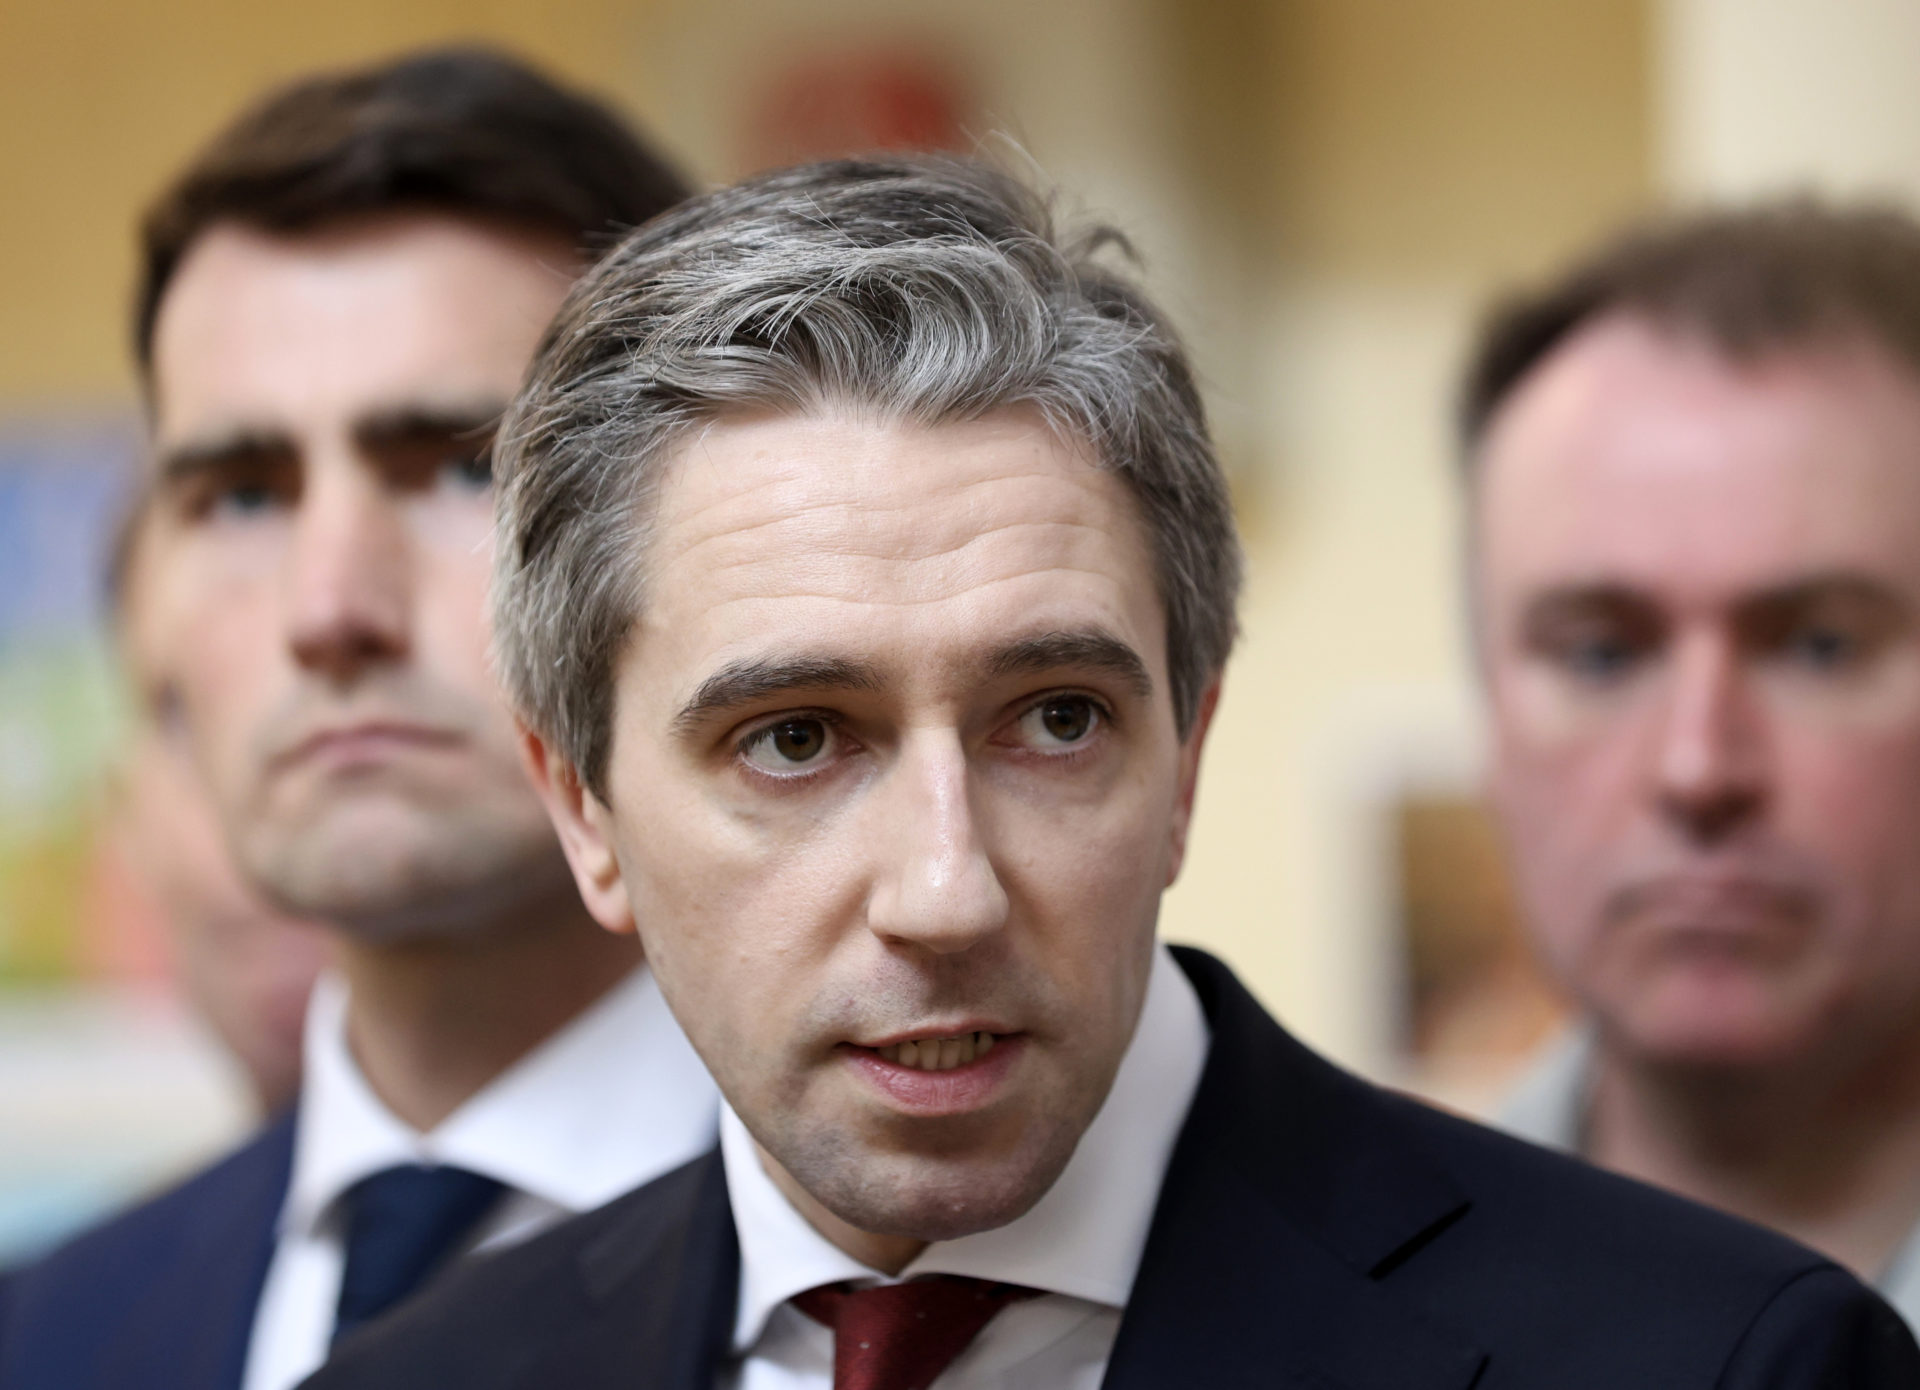 Harris ‘irritated’ Northern Ireland remarks ‘taken out of context’